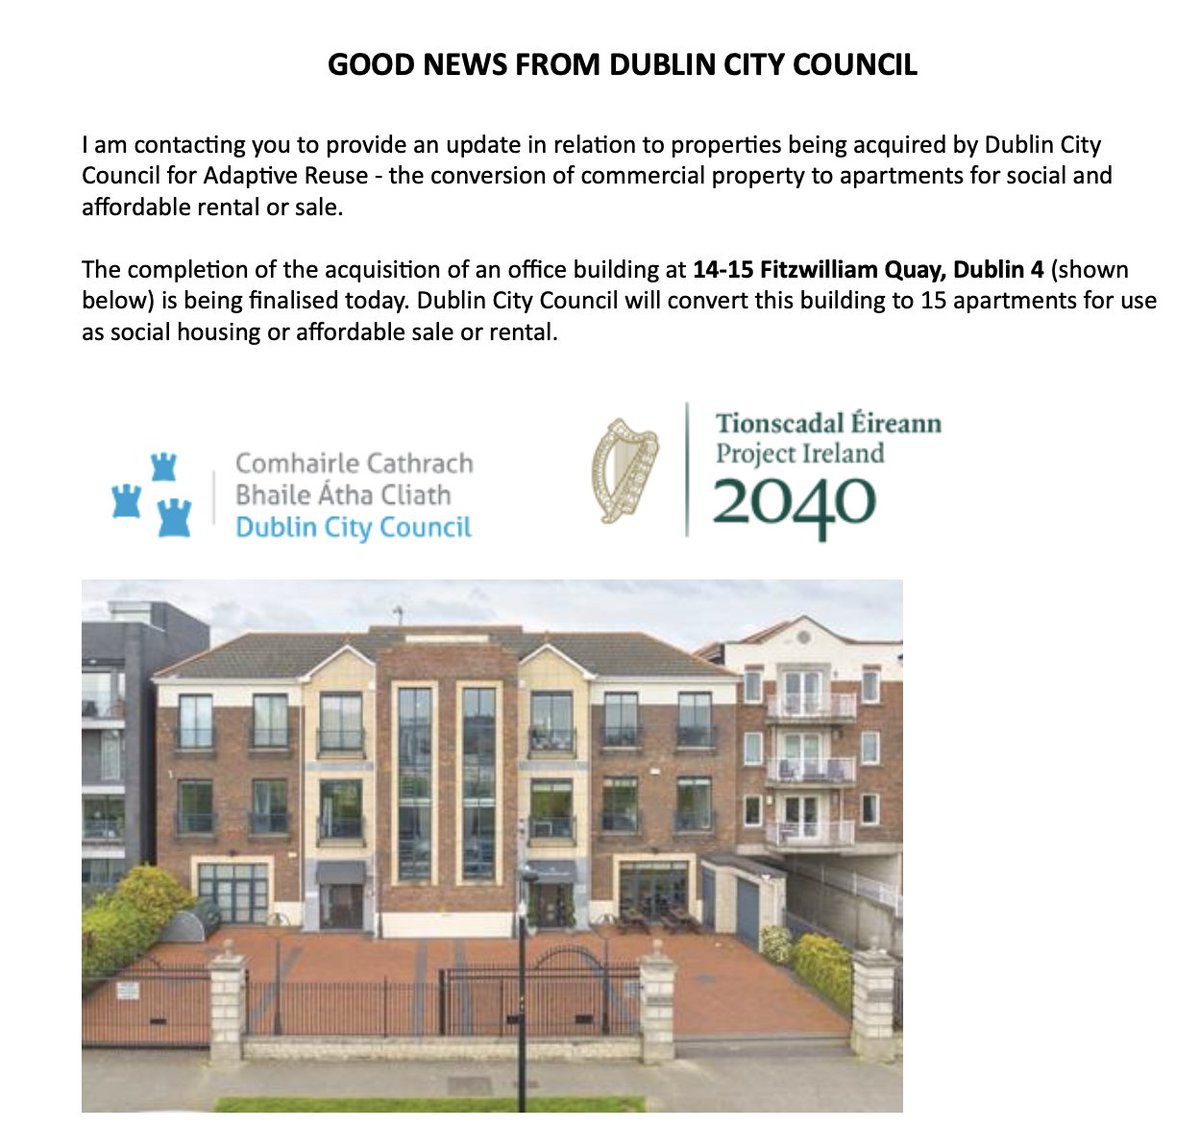 What amazing news to start off the week! 🙌 @DubCityCouncil have bought an office block on Fitzwilliam Quay and will be renovating it in 15 apartments as social or affordable housing! This is an example of what we need the govt to be doing on a much larger scale!